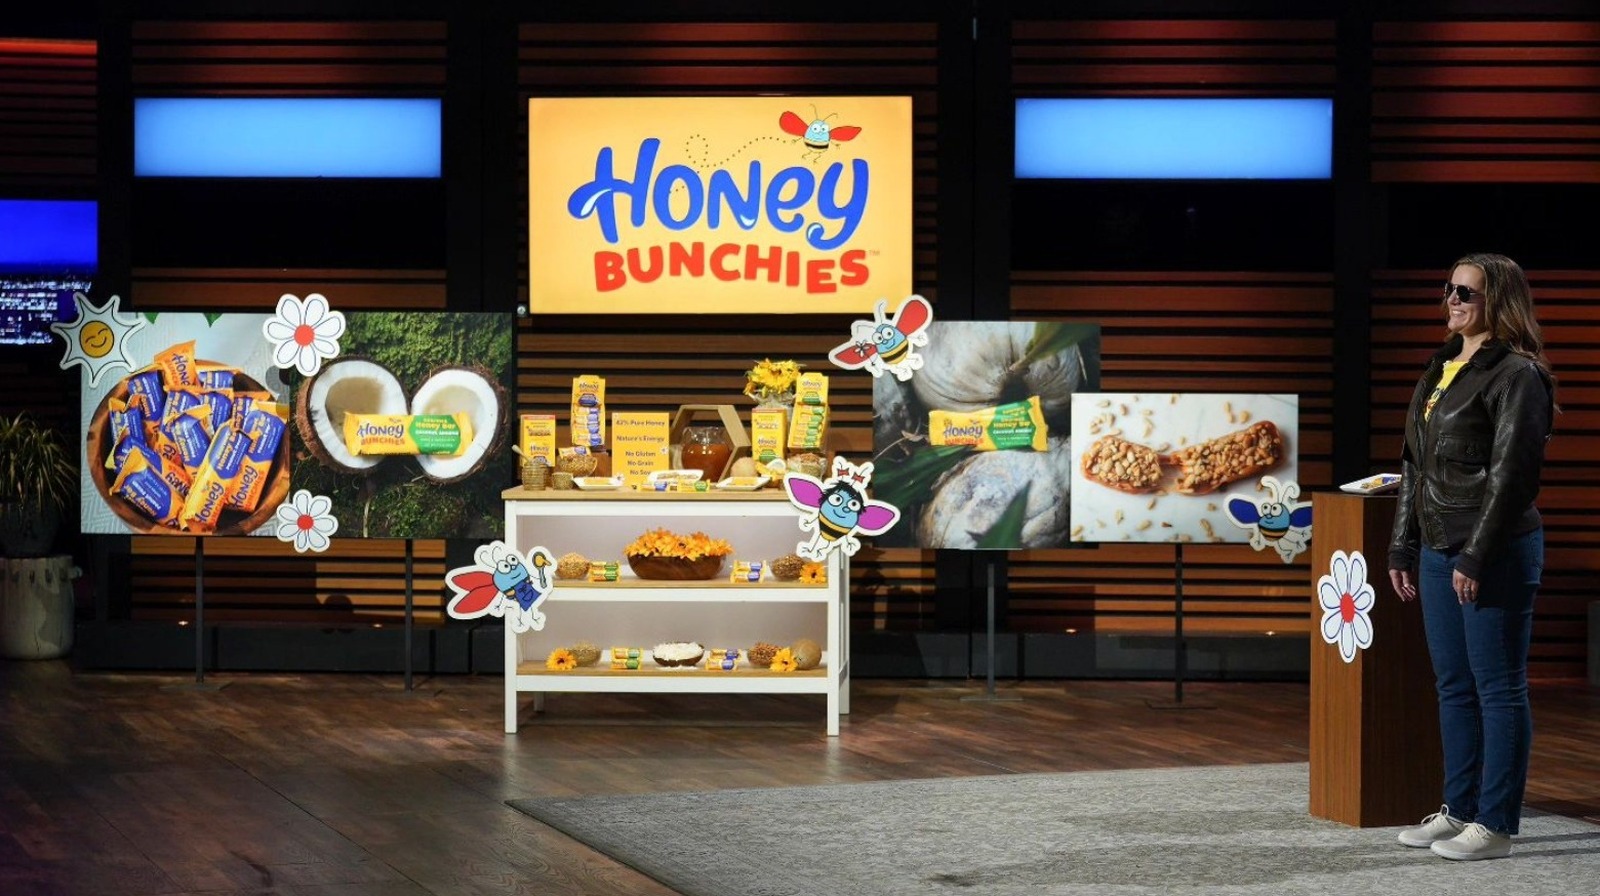 https://www.foodrepublic.com/img/gallery/honey-bunchies-heres-what-happened-after-shark-tank/l-intro-1689804705.jpg